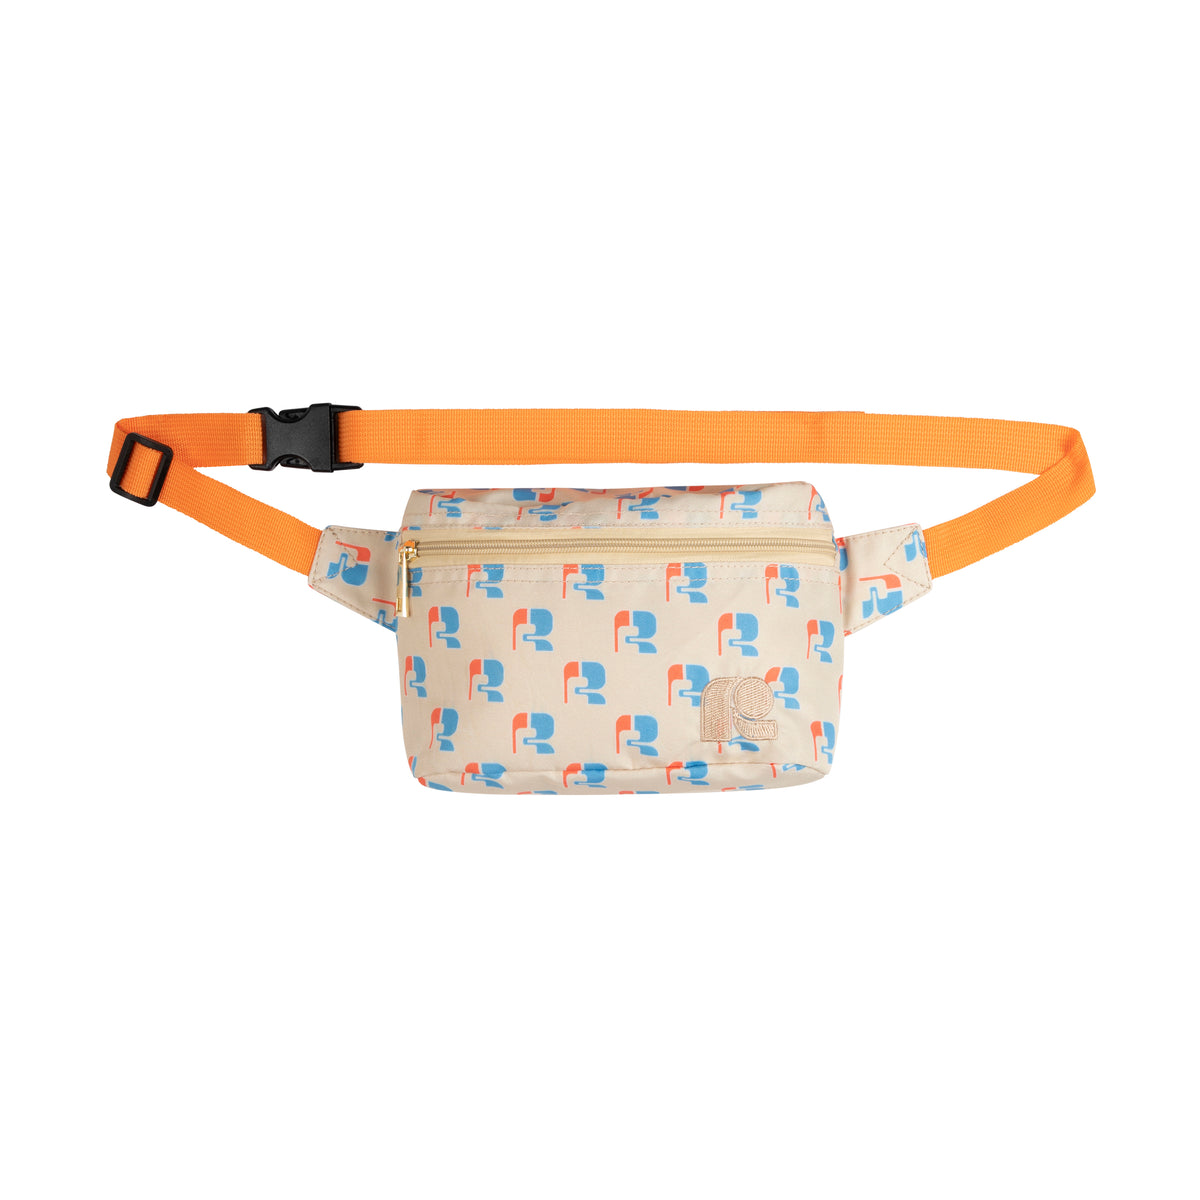 Fanny pack blue red